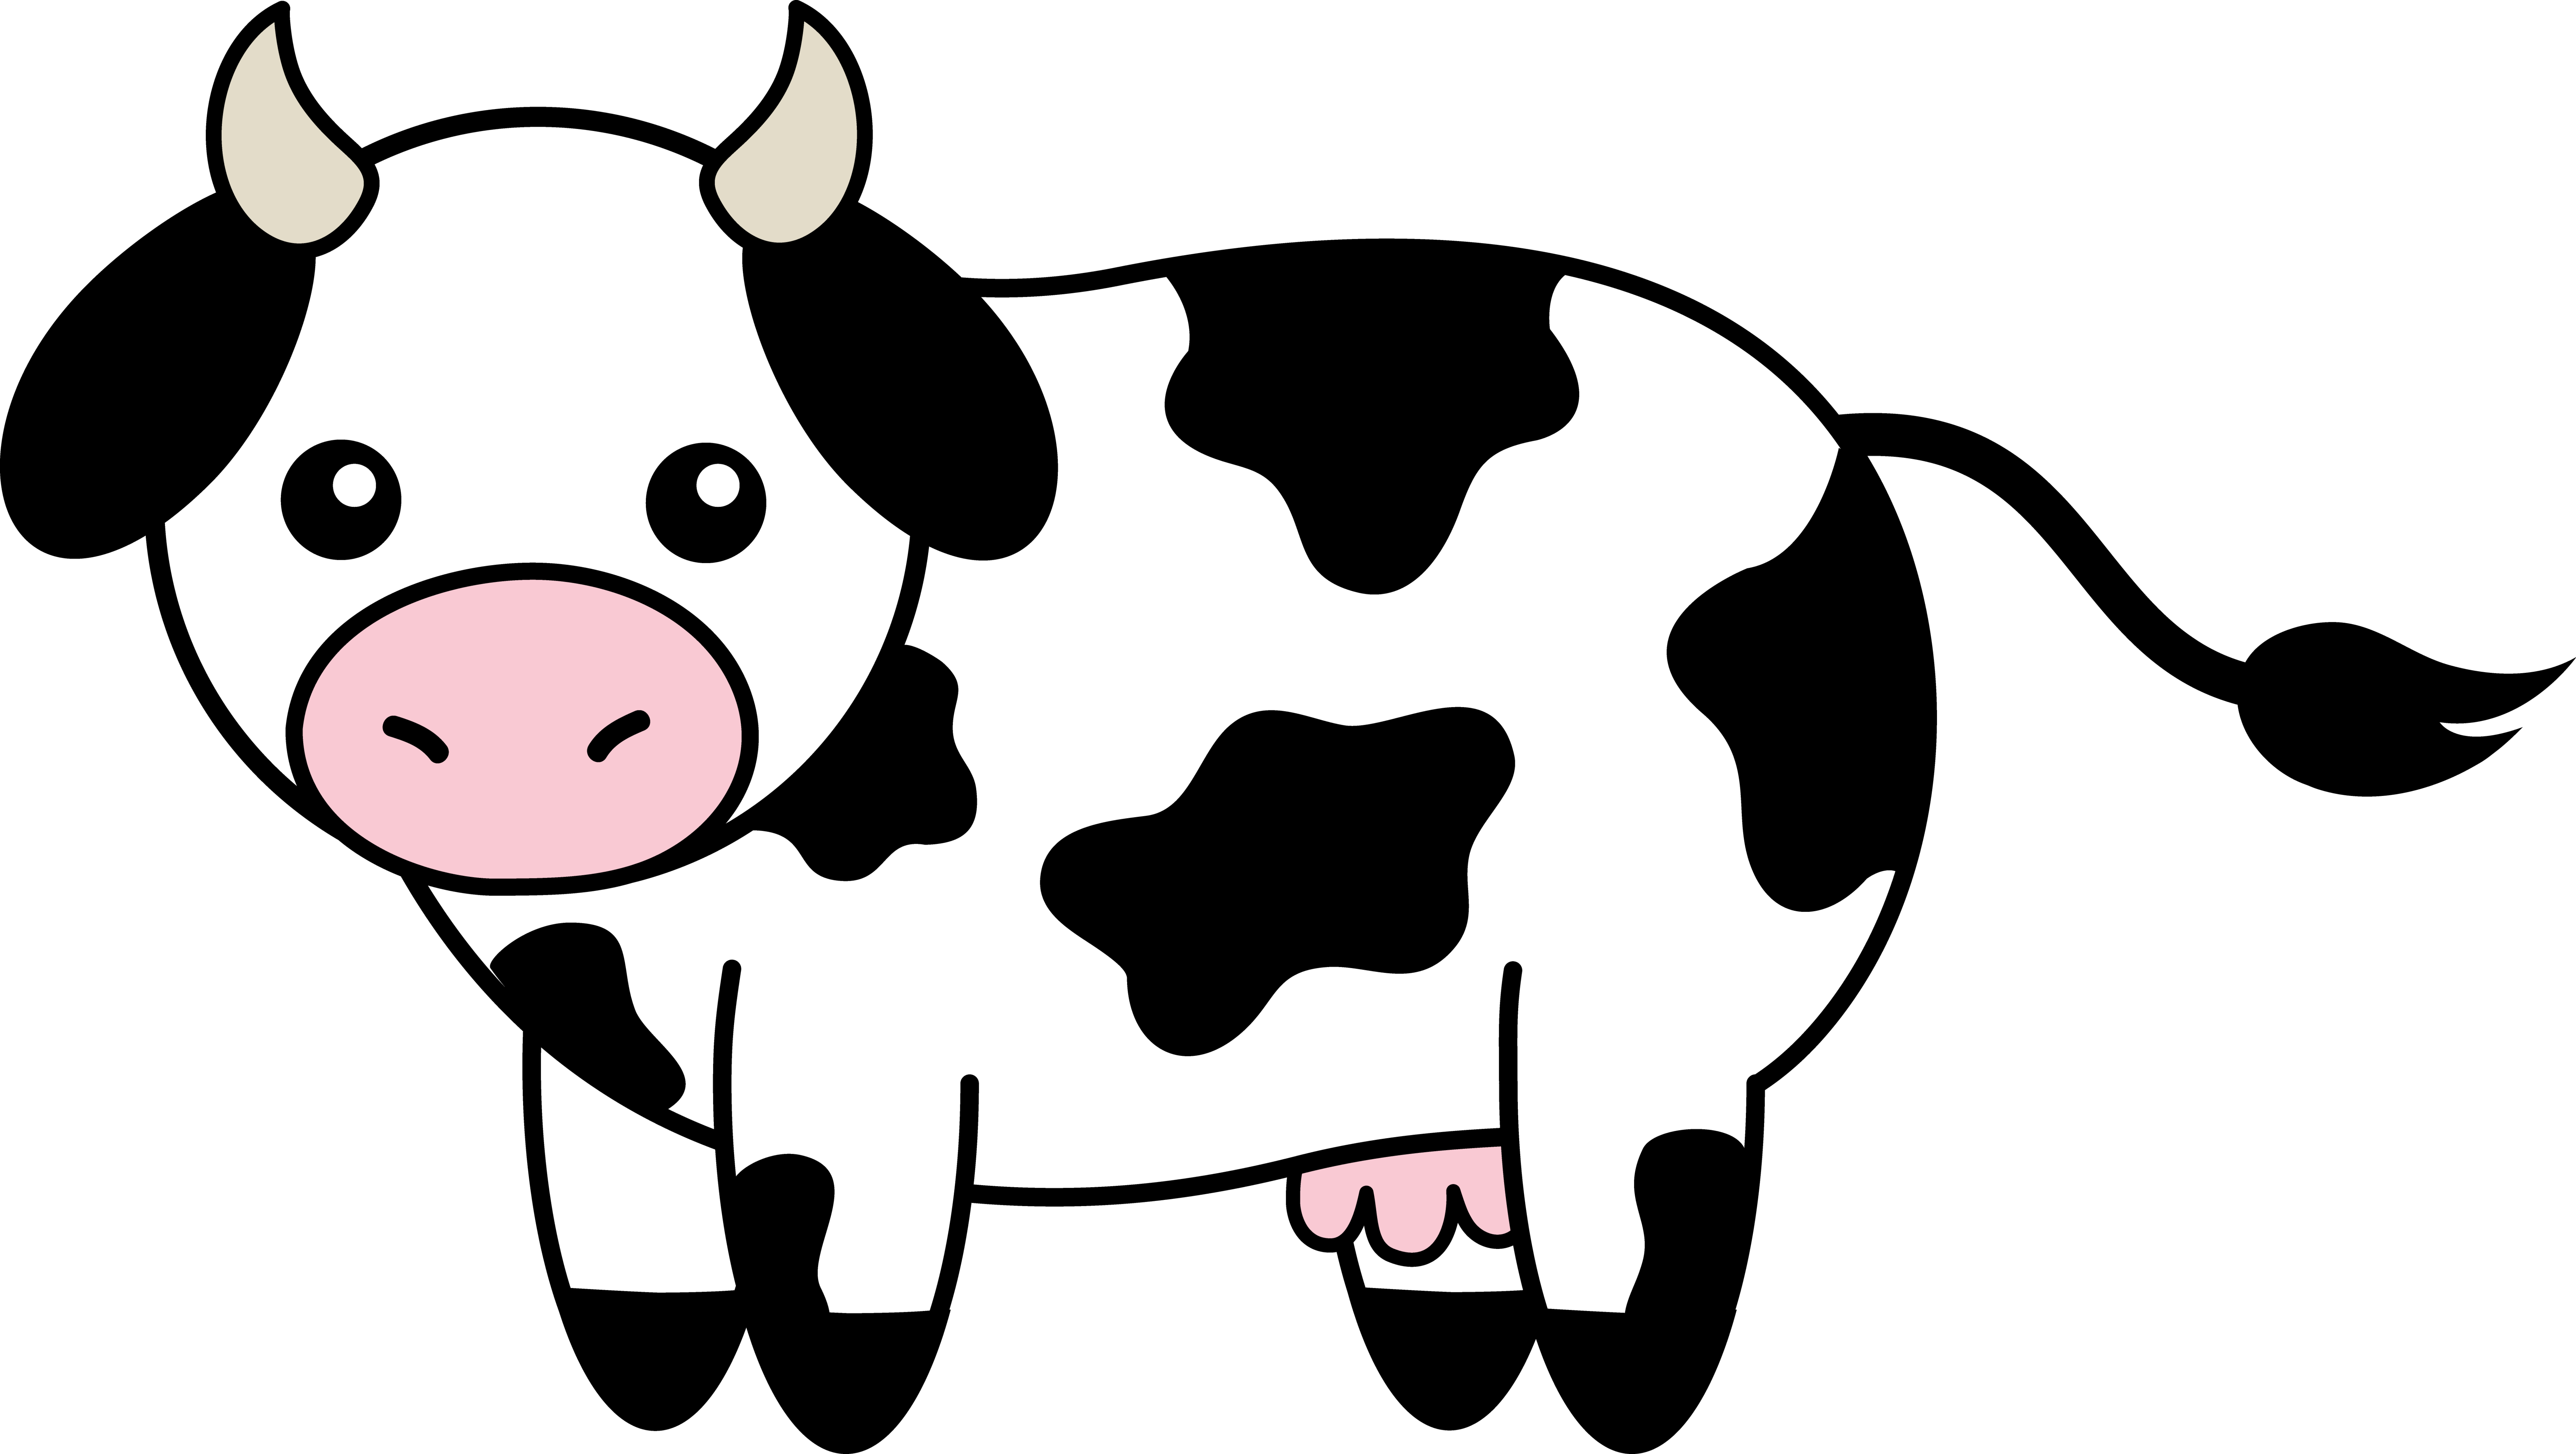 Dairy Cow Clipart - Dairy Cow Clip Art